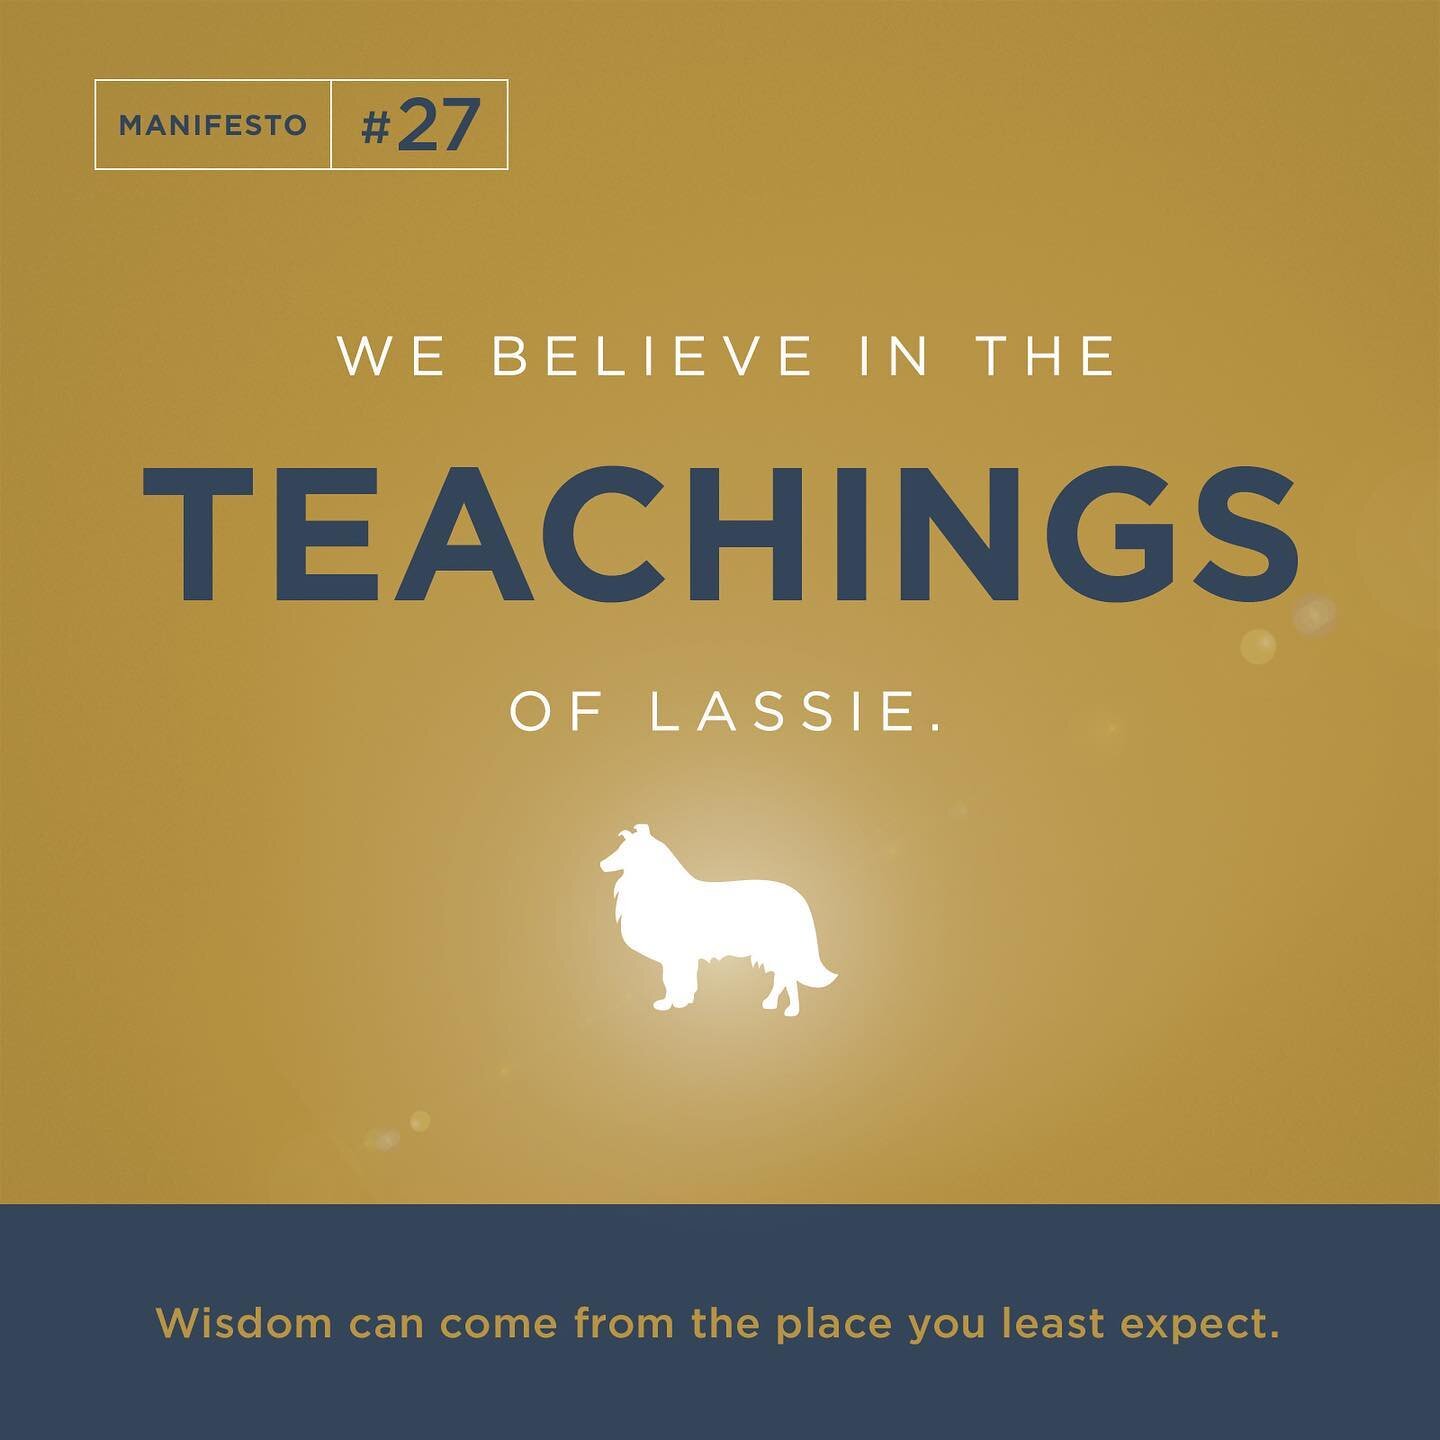 We believe in the teachings of Lassie. 
Wisdom can come from the place you least expect.
 
#WeBelieve #Brand33 #B33Manifesto #Brand #Marketing